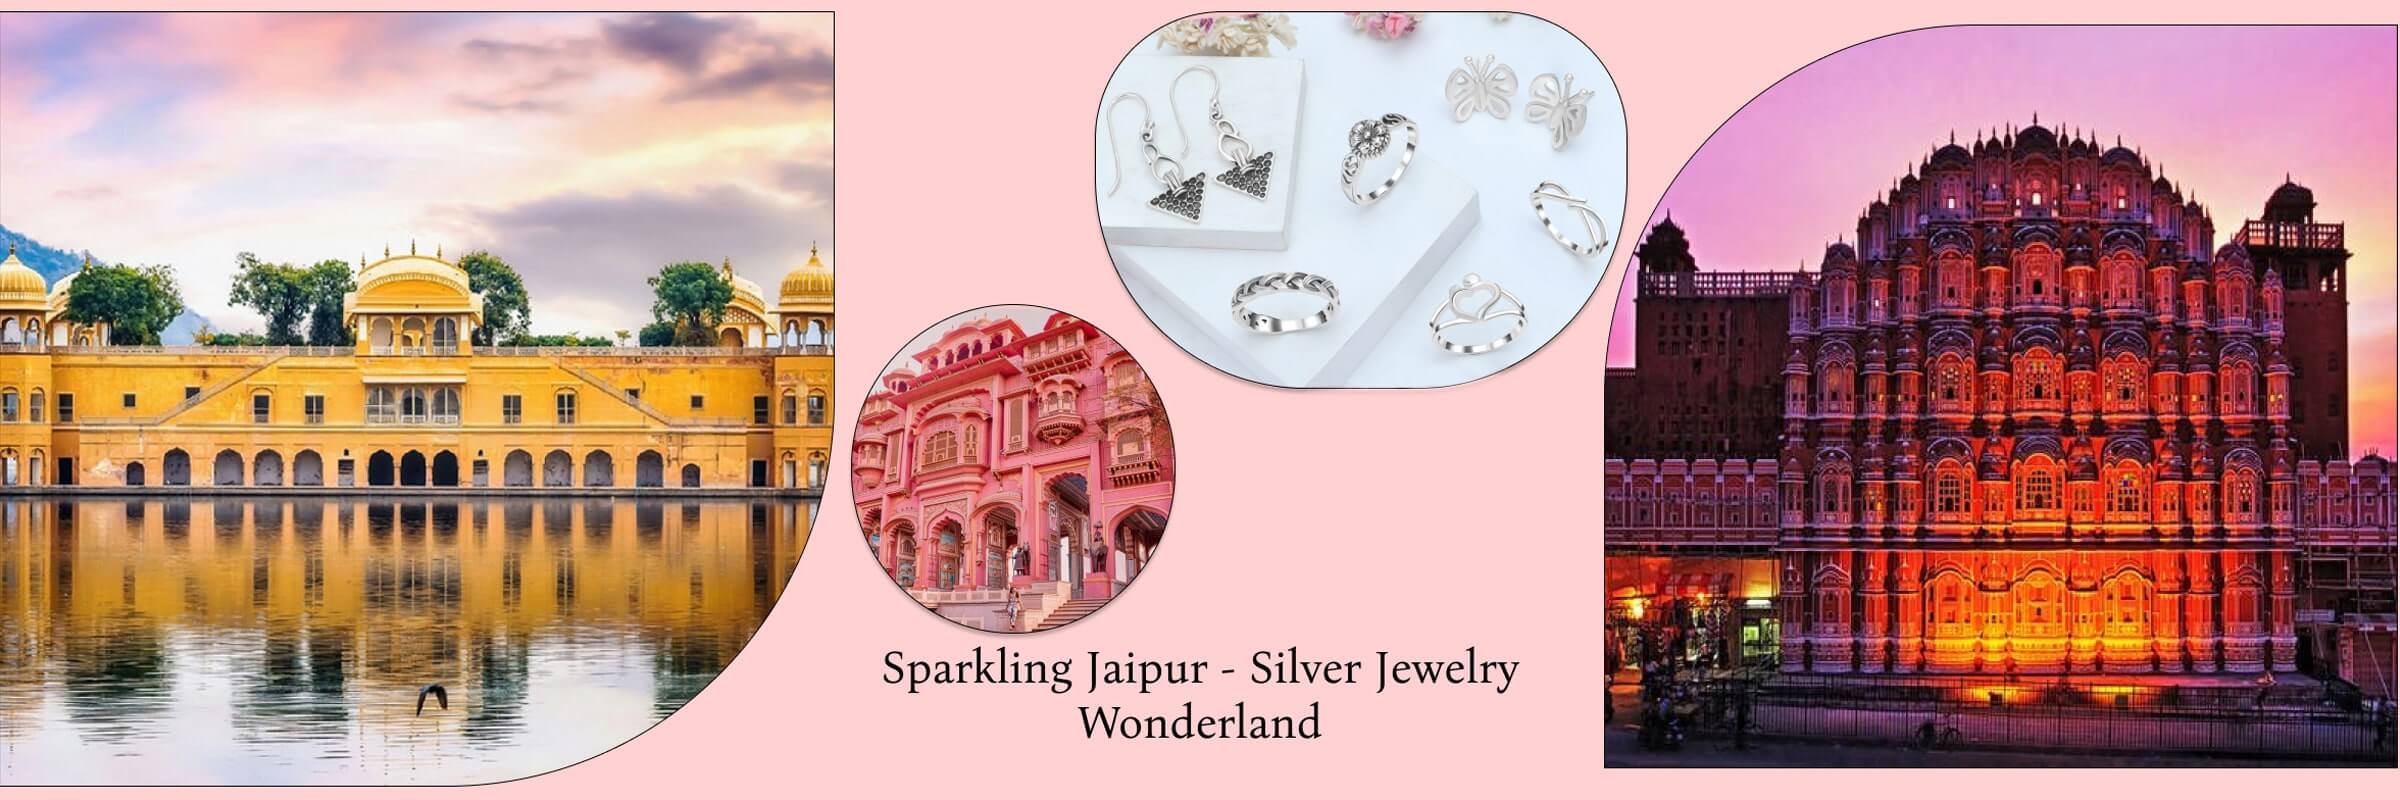 Shop for Handcrafted Silver Jewelry in Jaipur